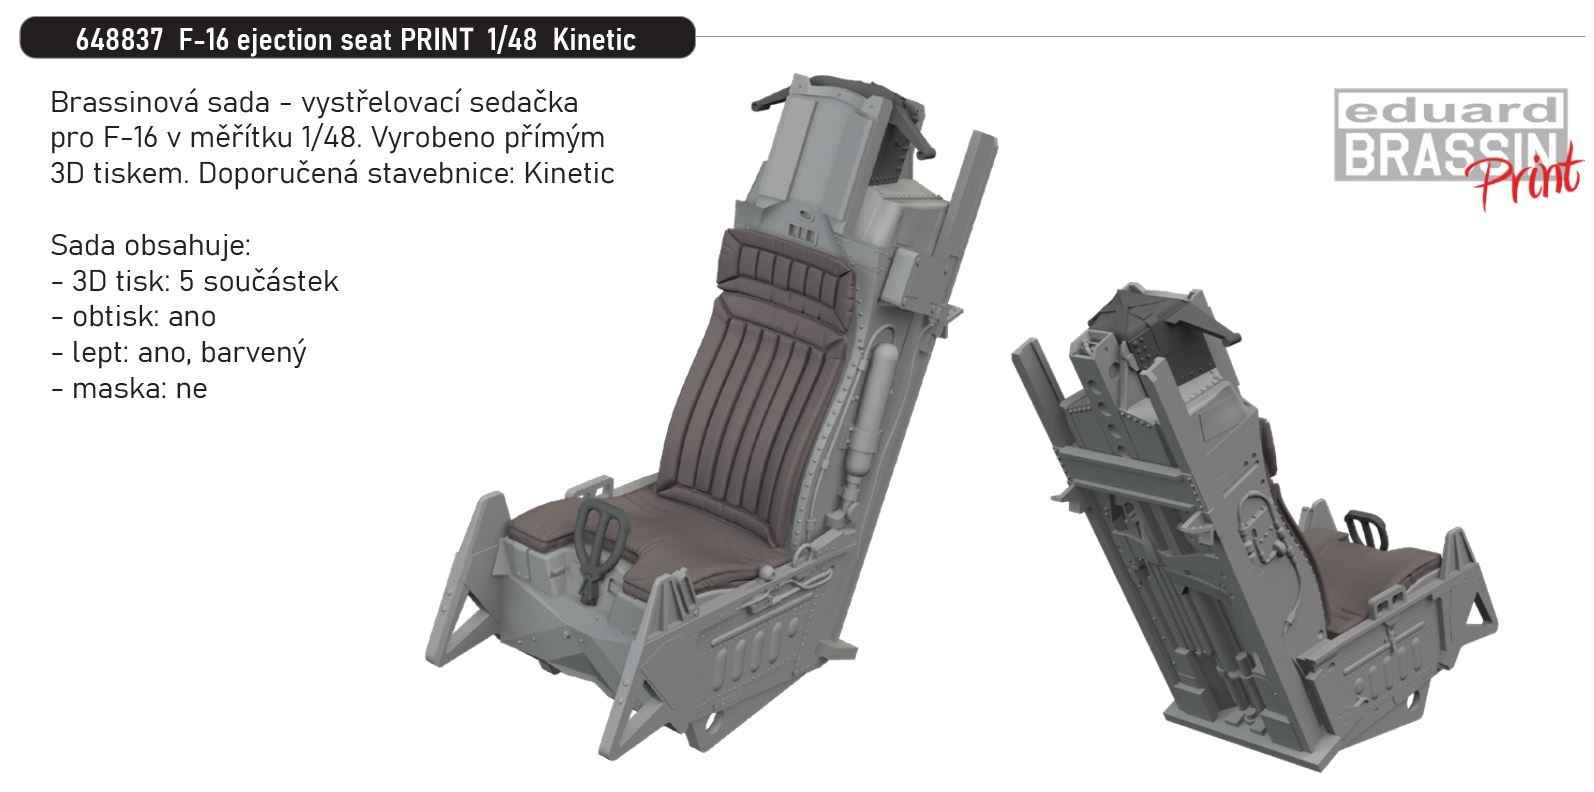 1/48 F-16 ejection seat PRINT (KINETIC)